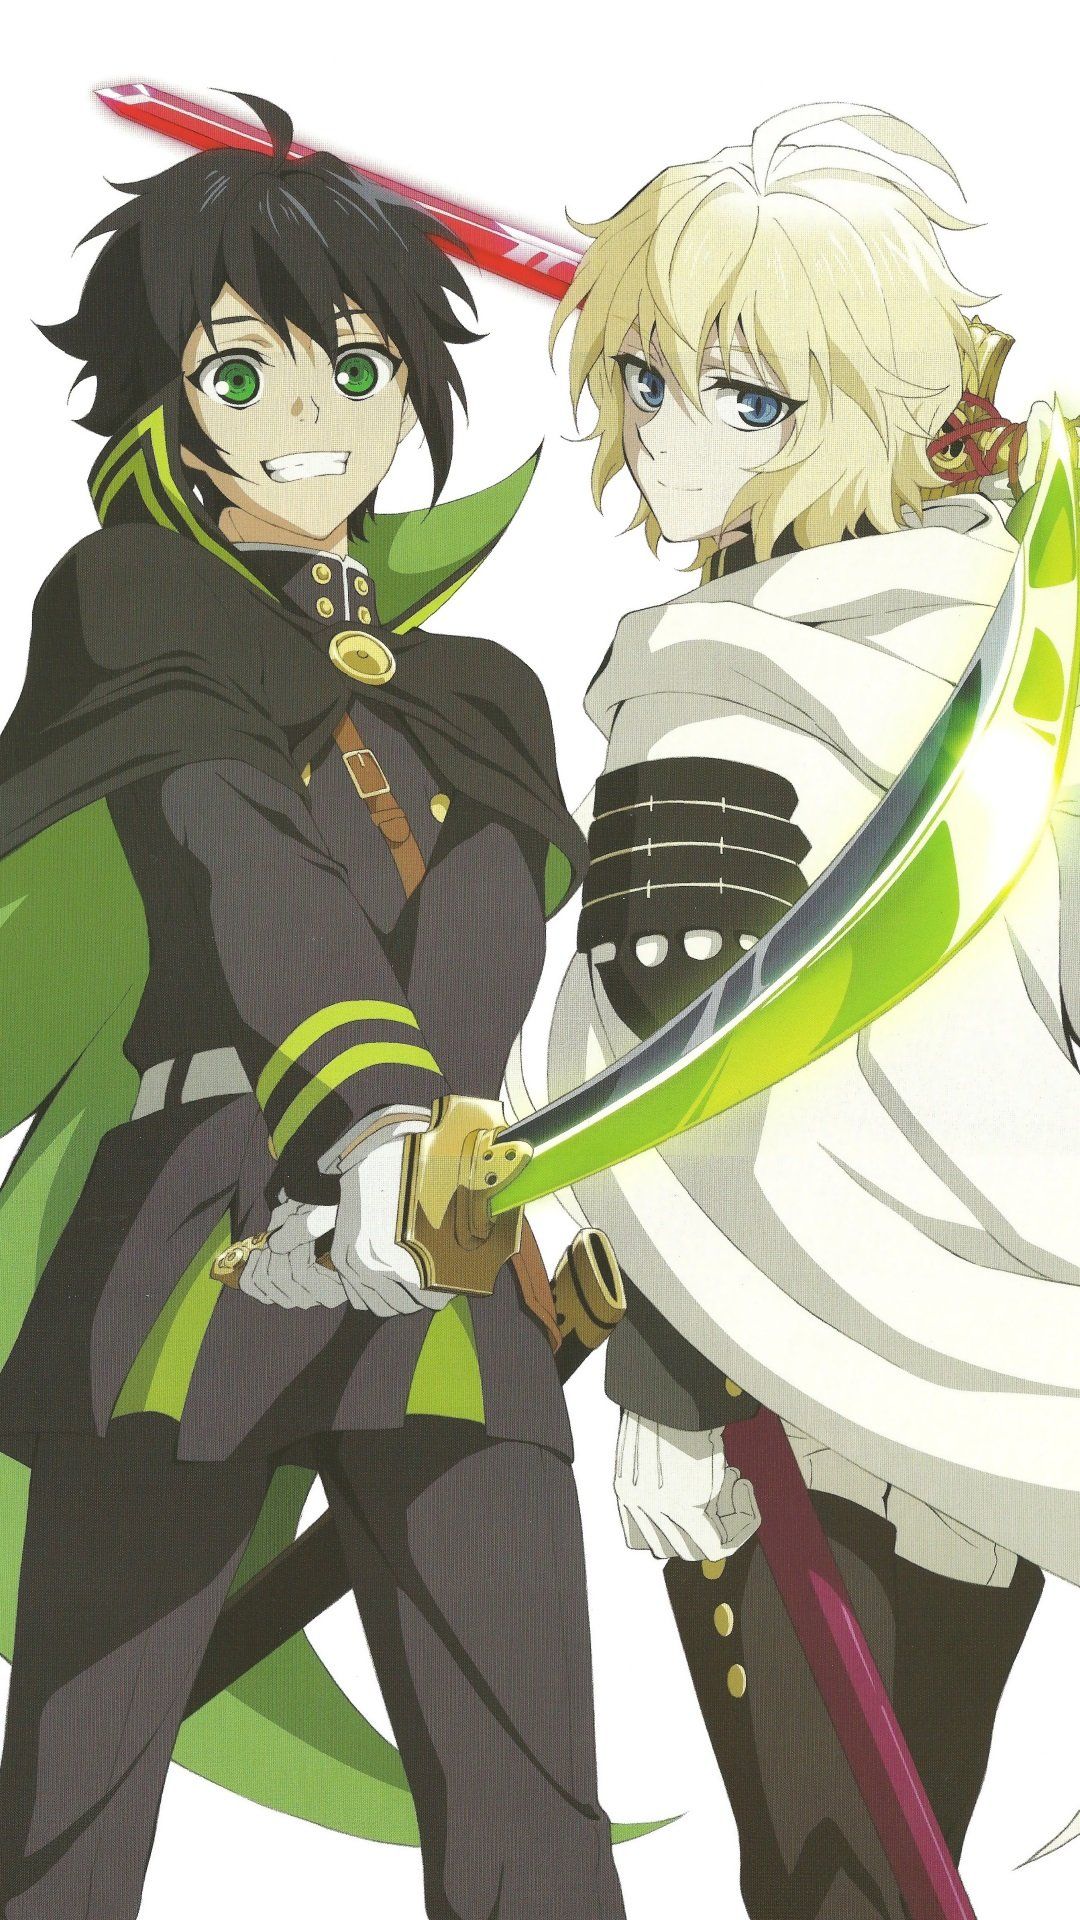 Owari no Seraph (Seraph of the End) anime wallpaper for iPhone and android smartphones